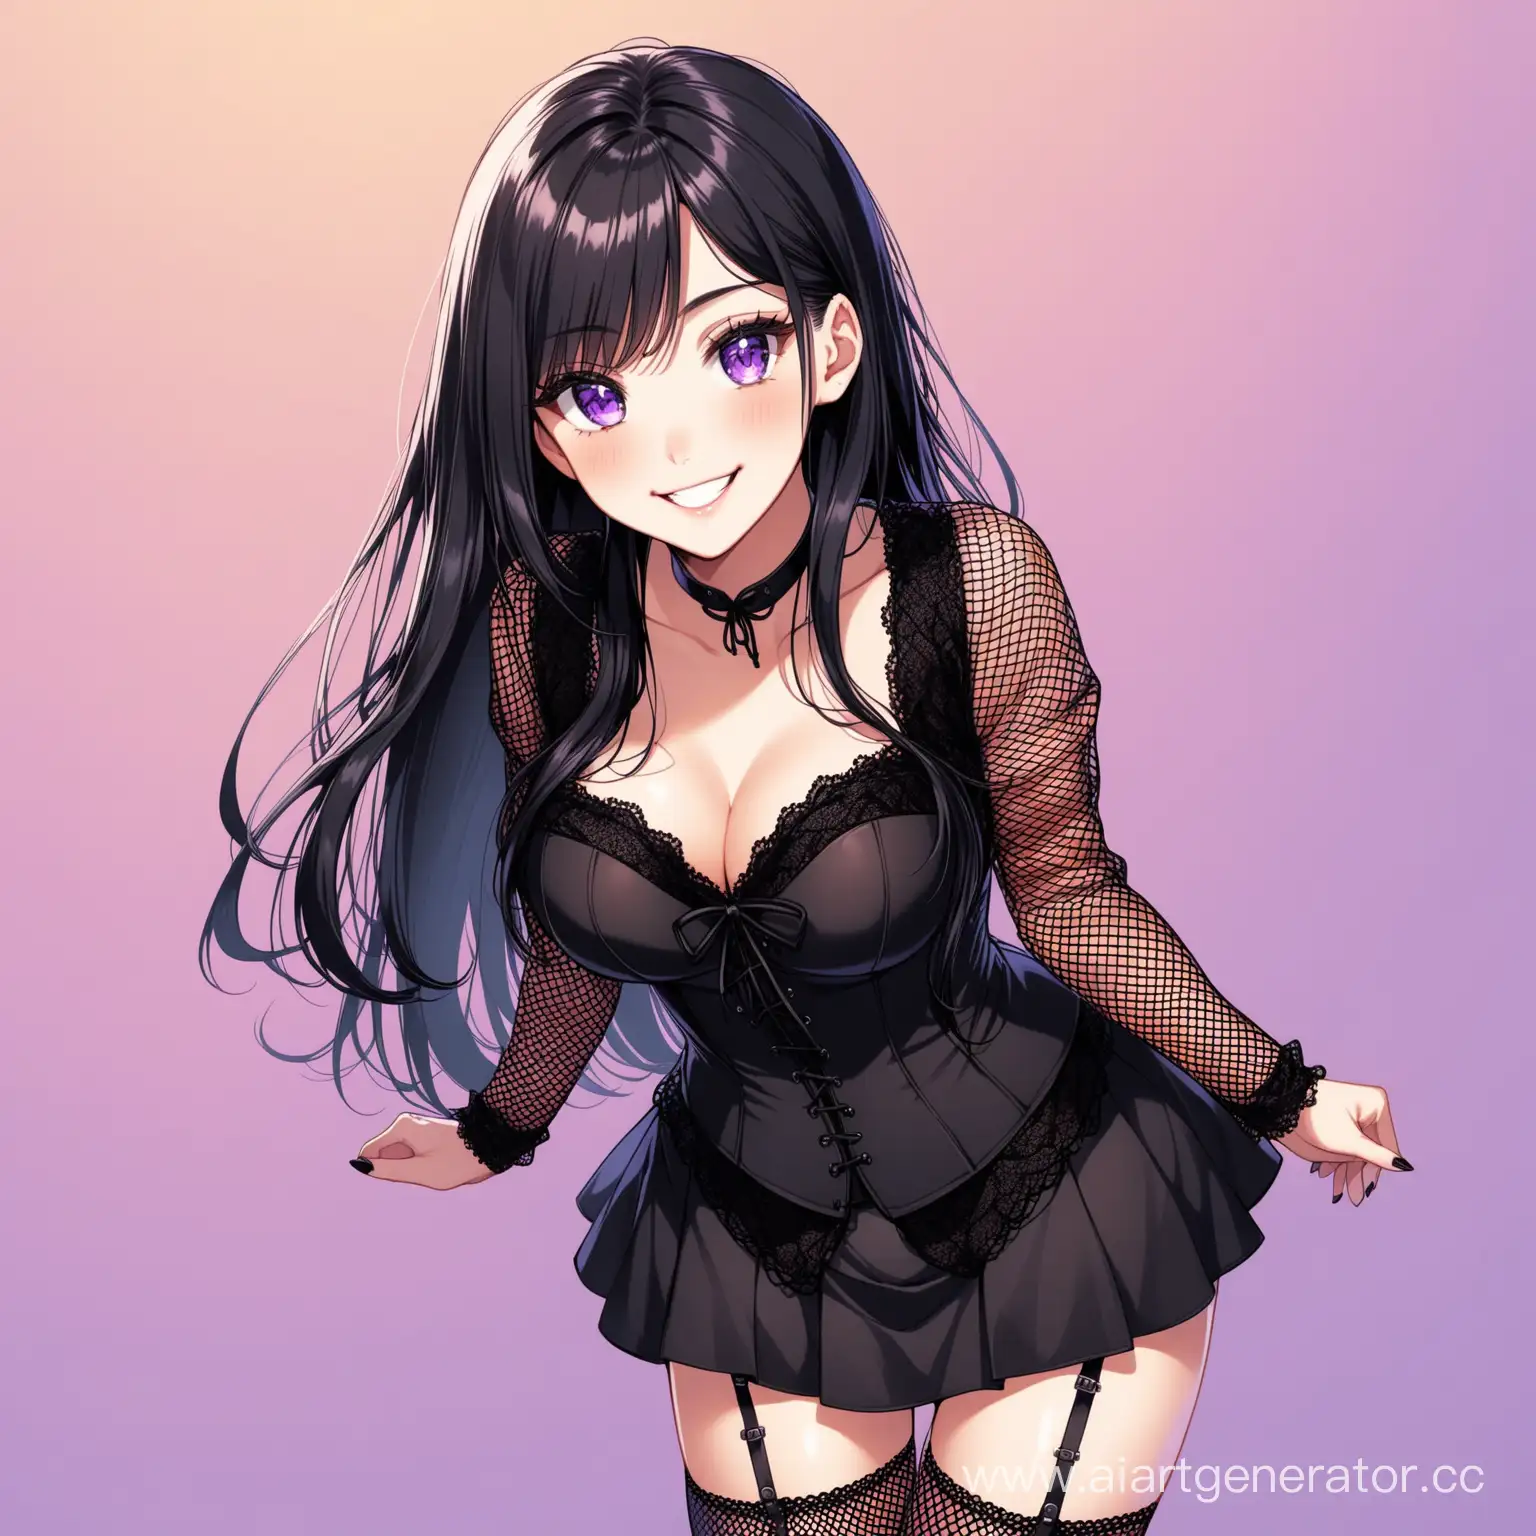 Playful-Young-Woman-in-Stylish-Black-Ensemble-with-Purple-Eyes